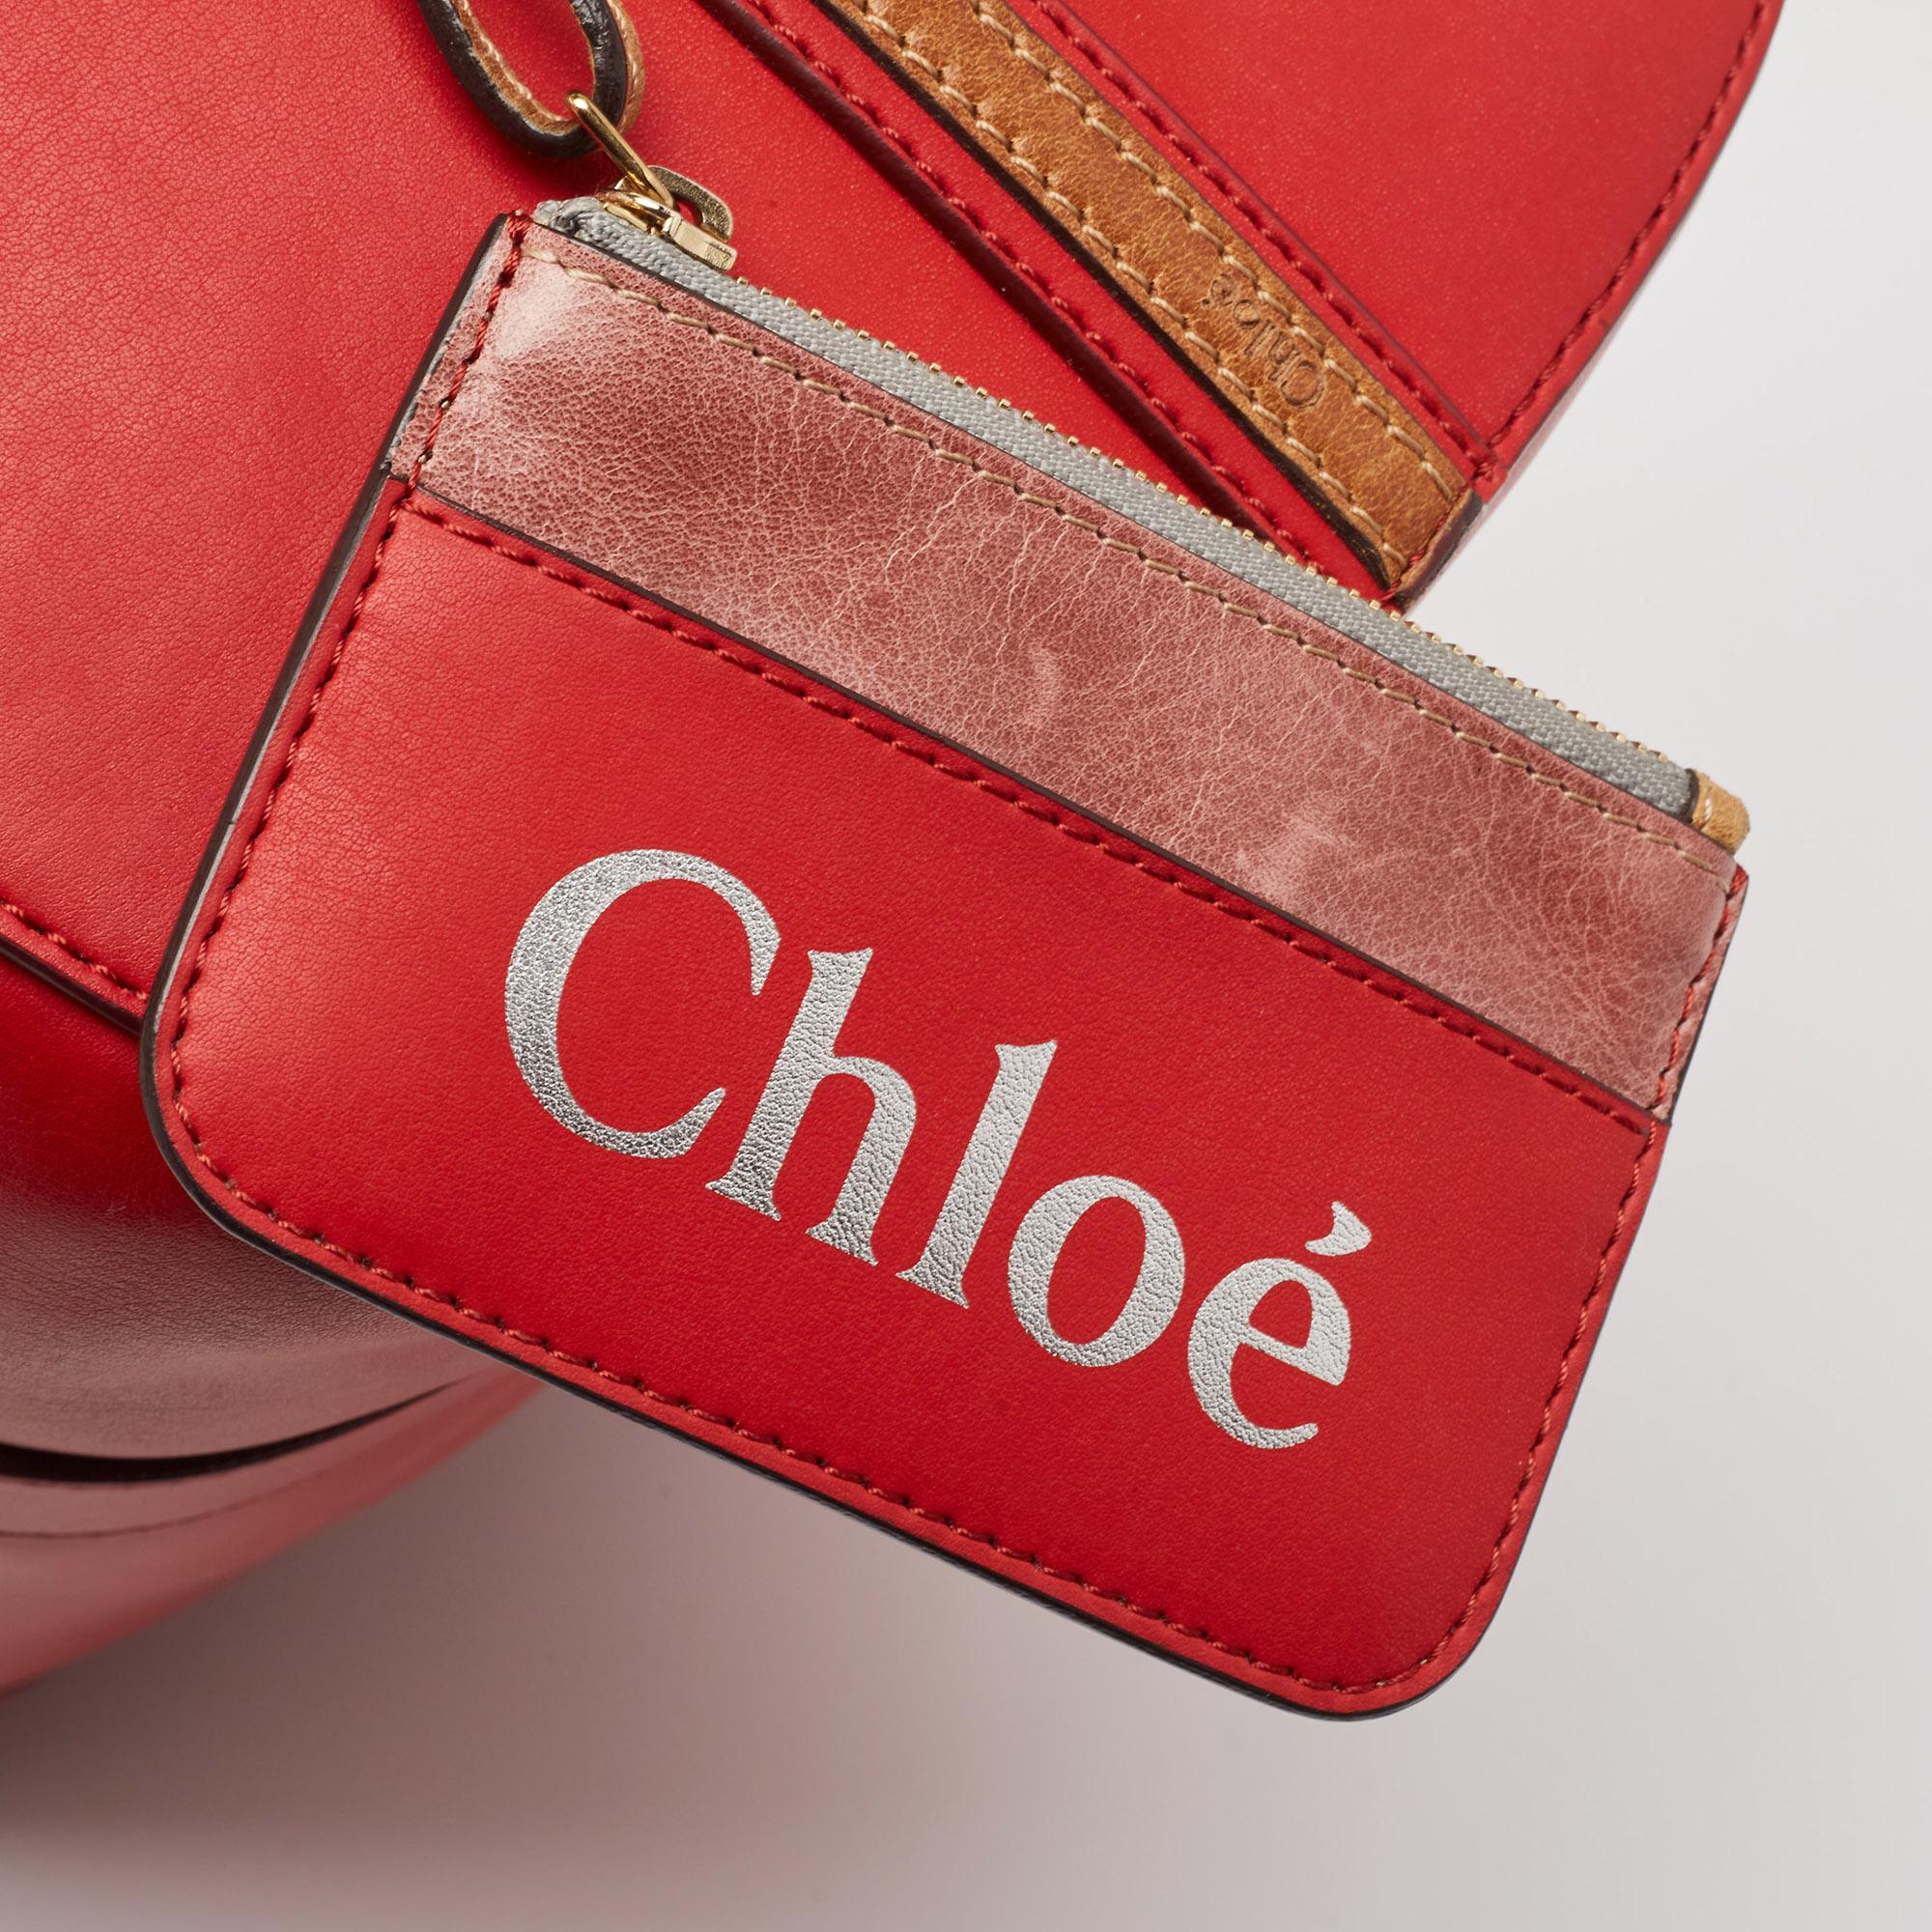 Chloe Red/Brown Leather Buckle Duffel Bag In Good Condition For Sale In Dubai, Al Qouz 2